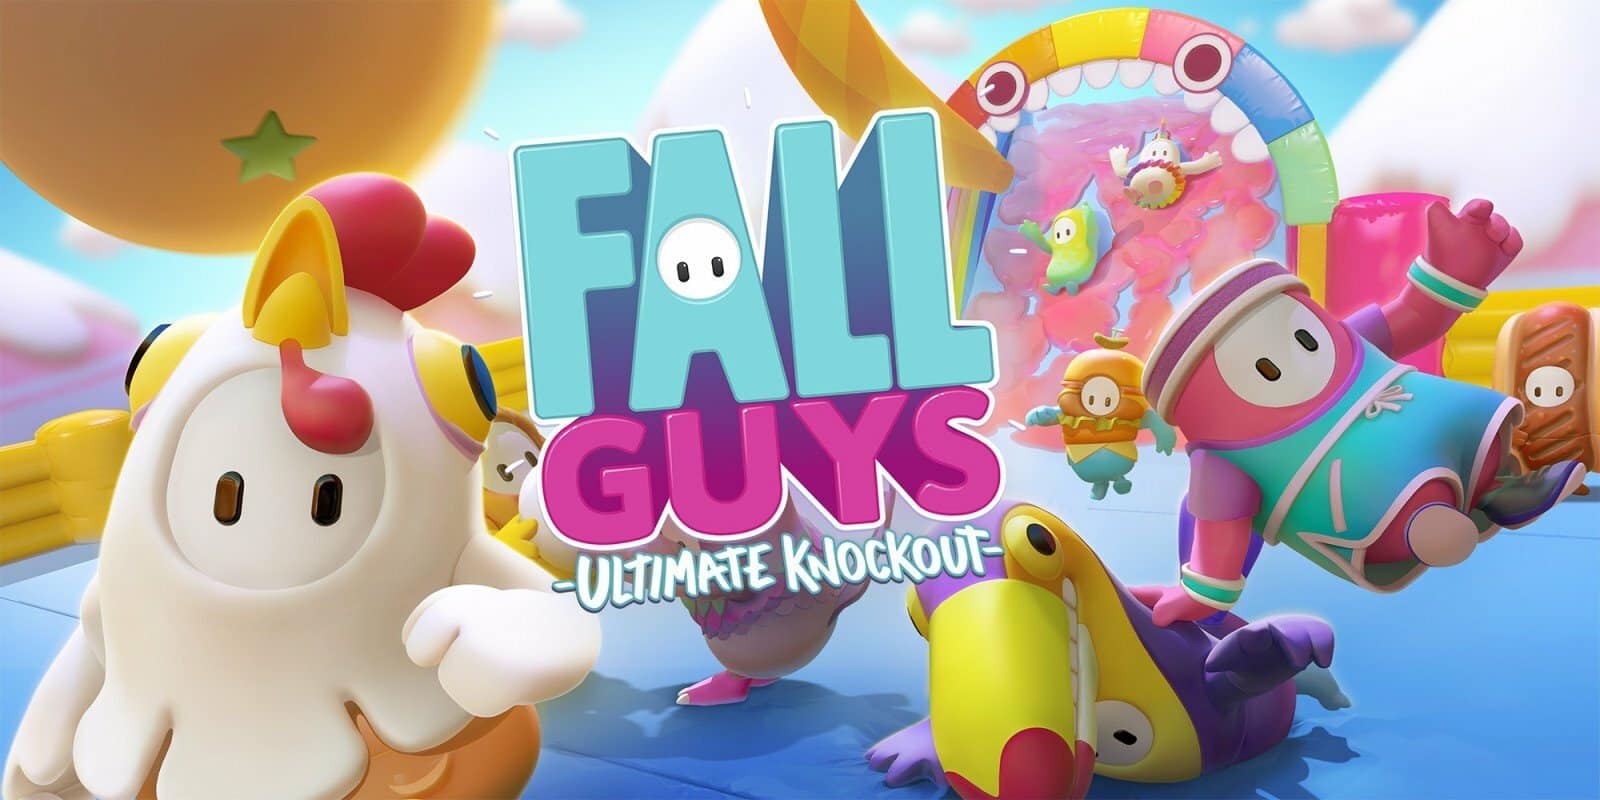 Fall Guys features various minigames like Wipeout that you'll have to complete.